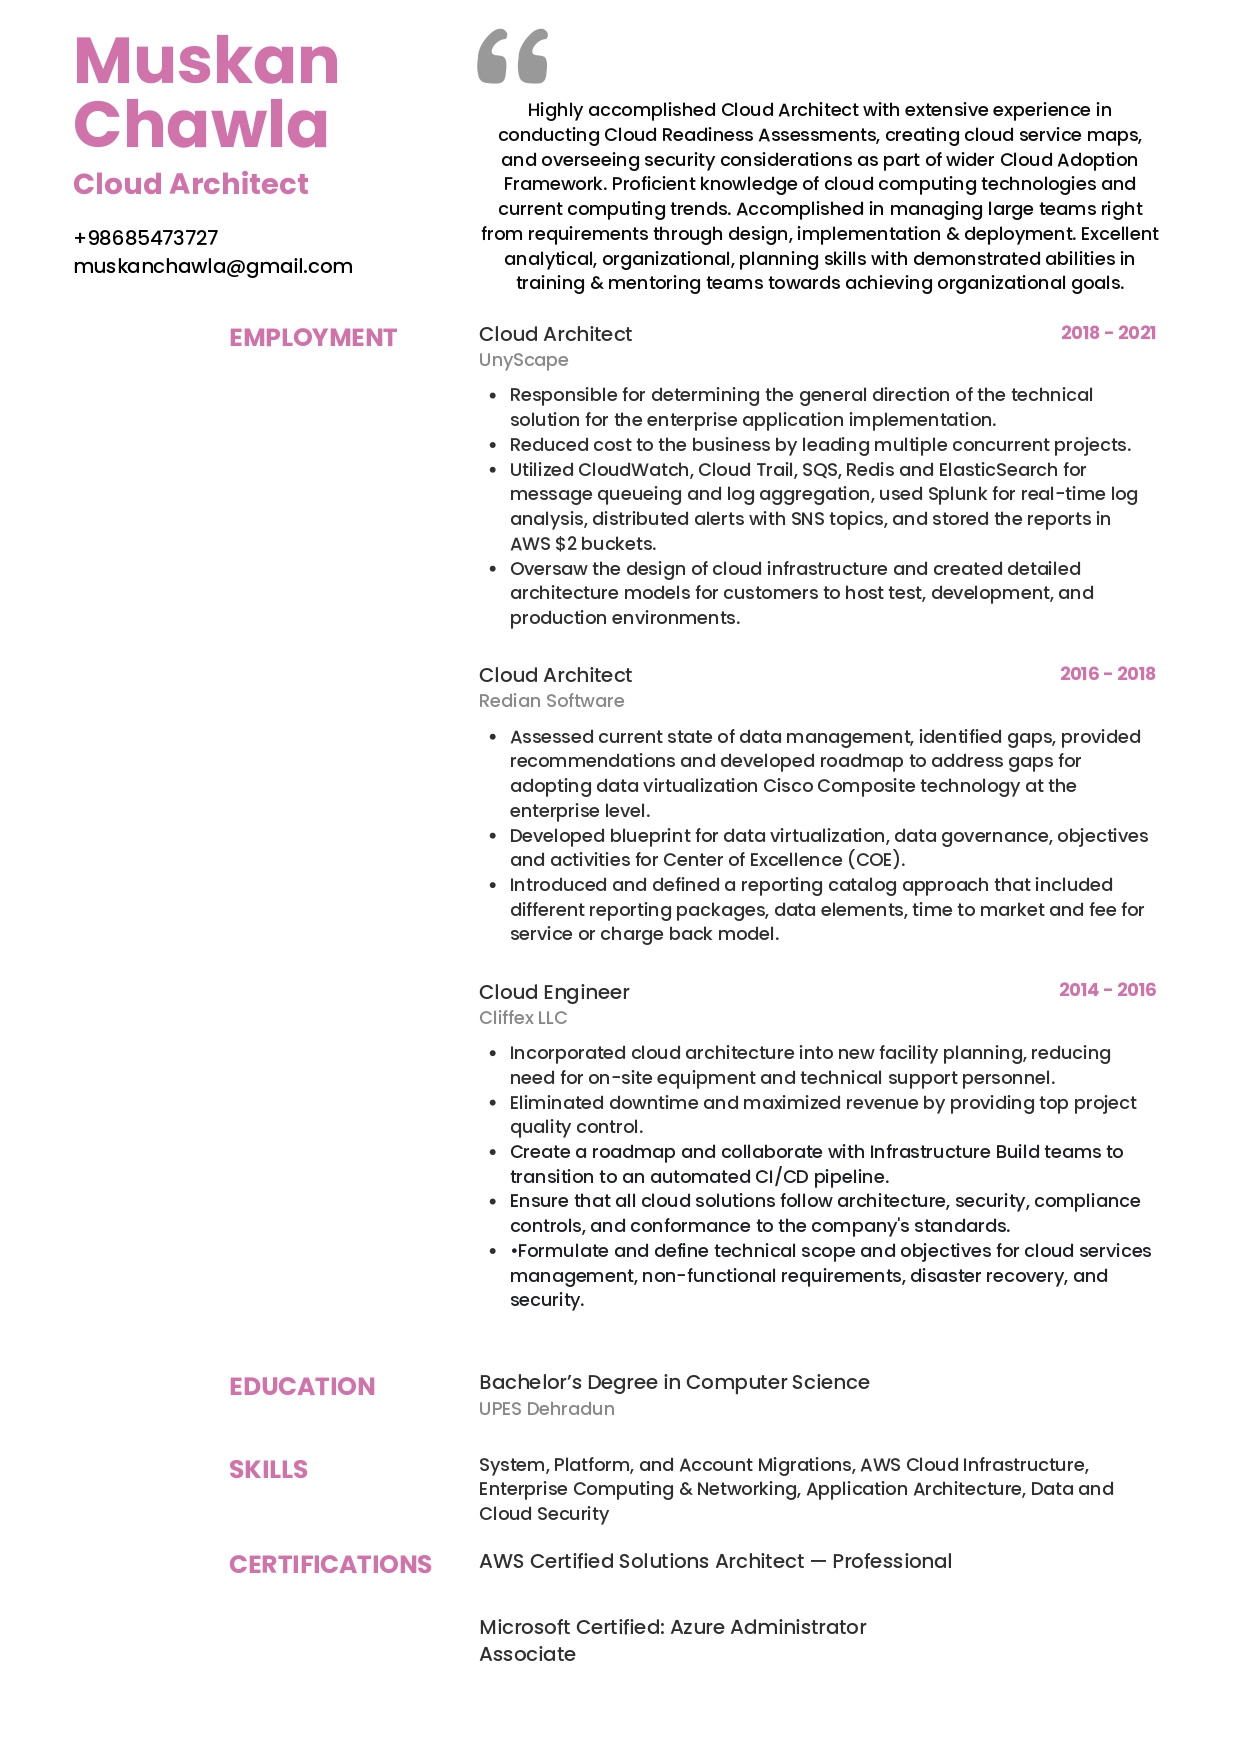 Sample Resume of Cloud Architect | Free Resume Templates & Samples on Resumod.co